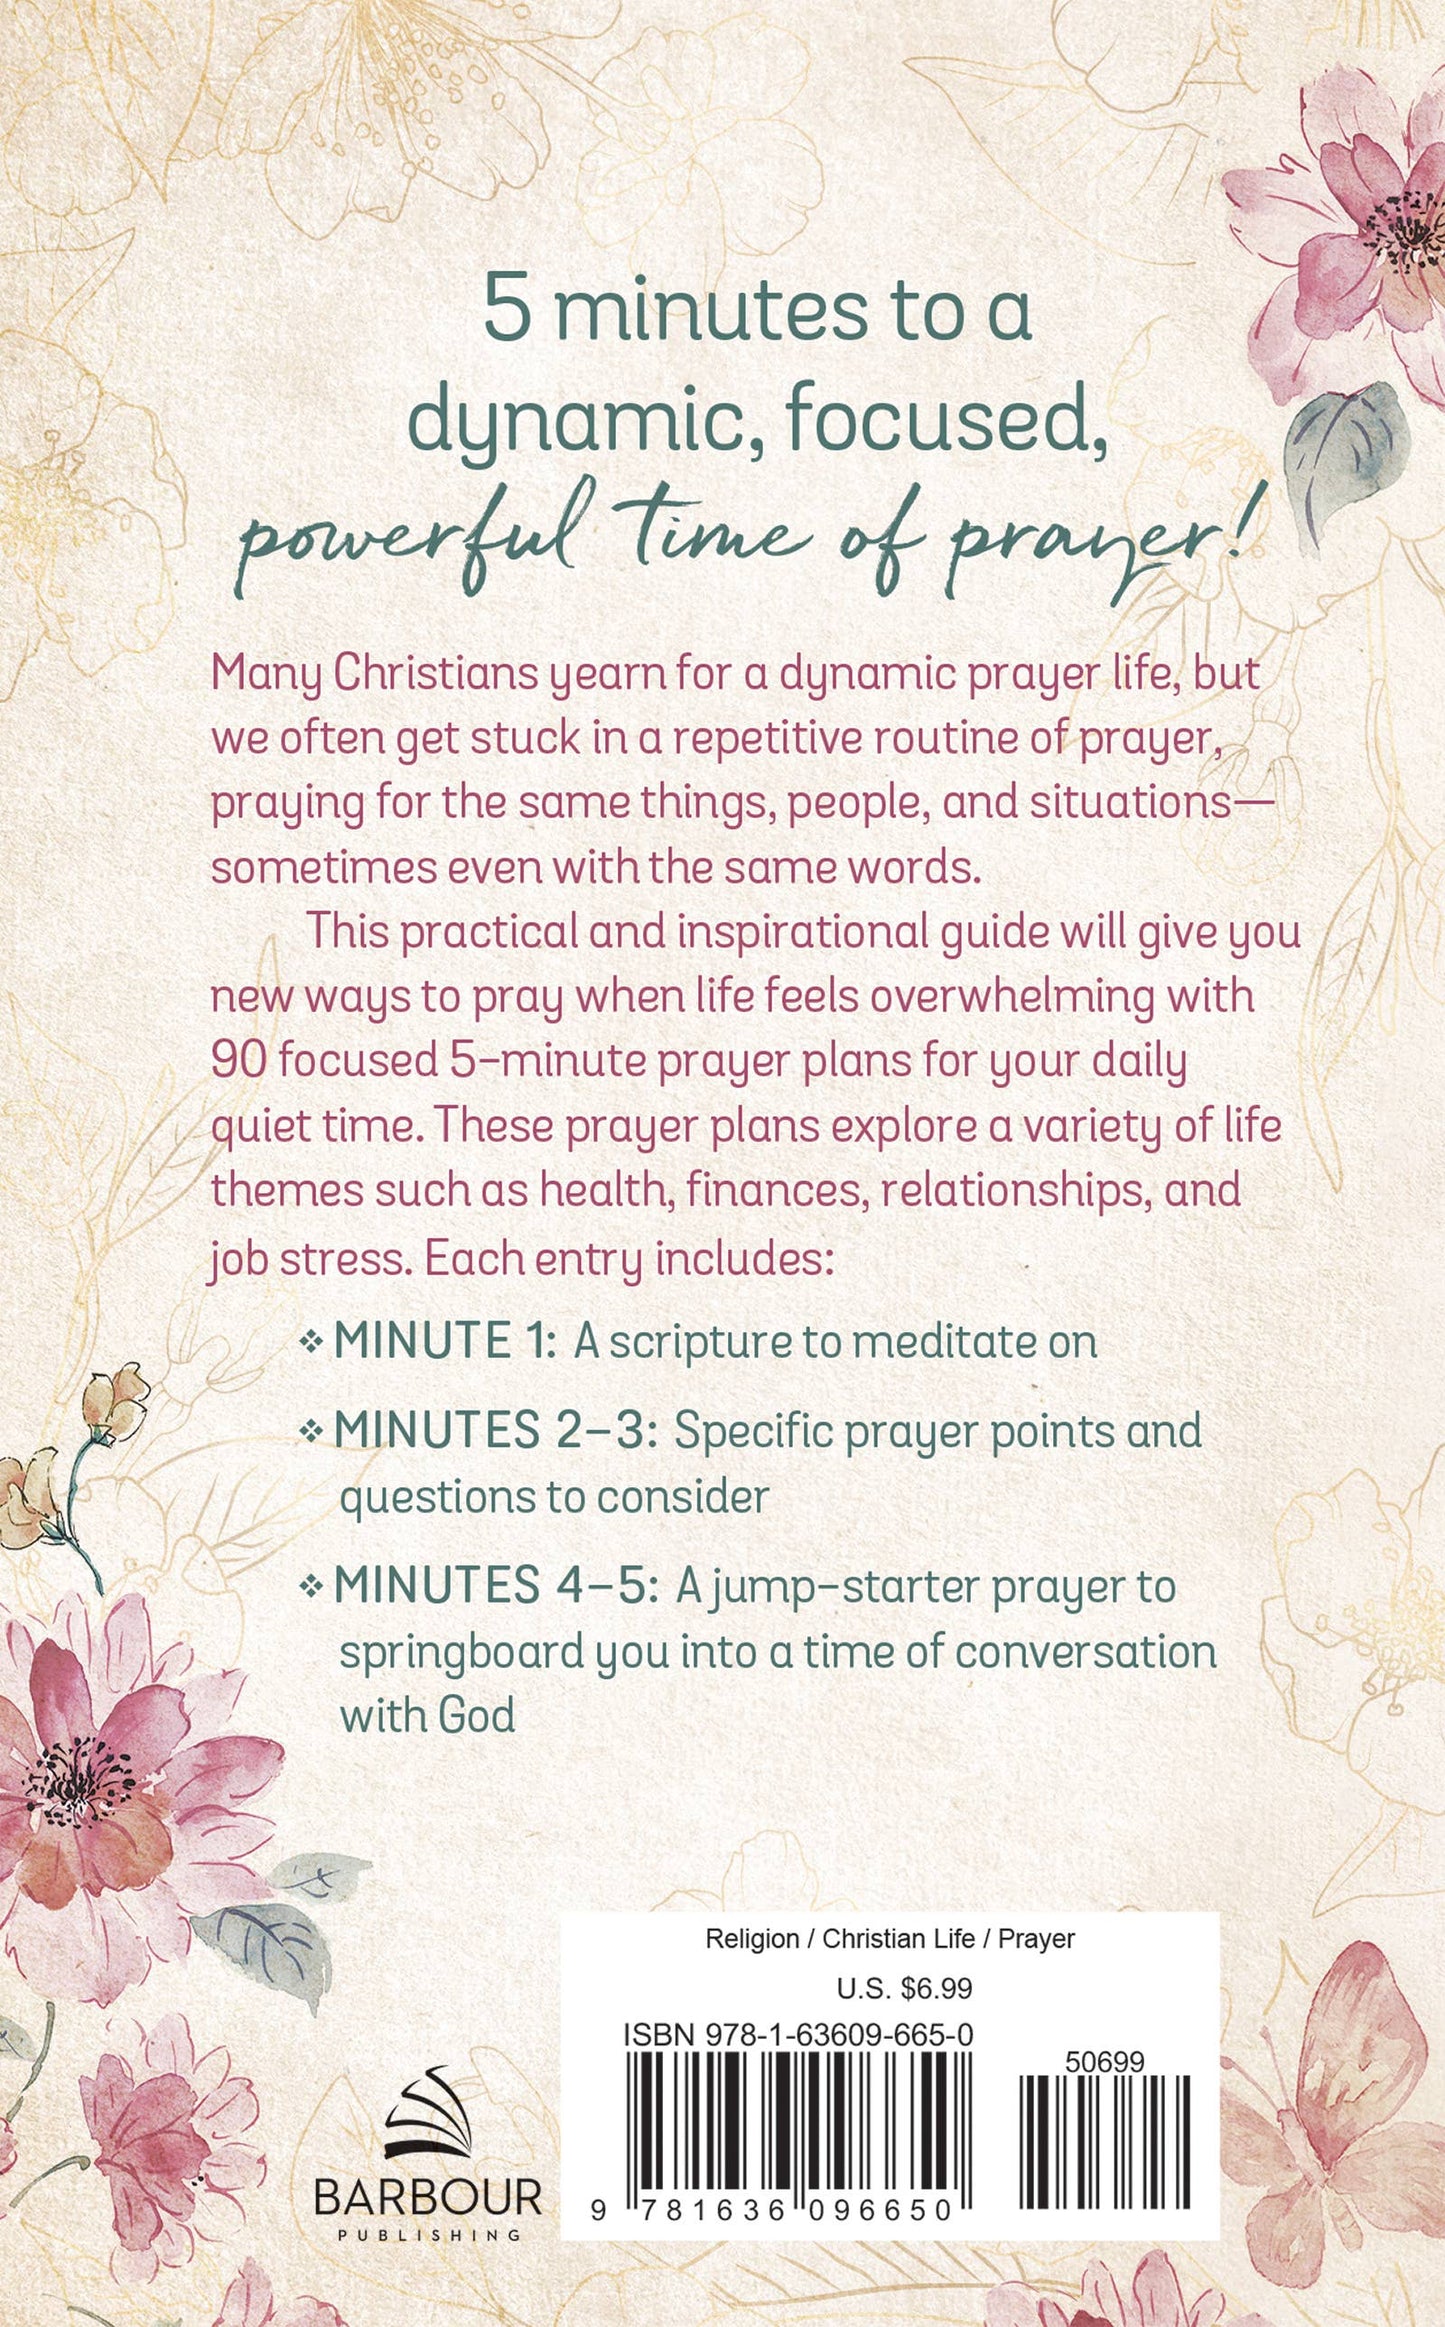 The 5-Minute Prayer Plan for When Life Is Overwhelming